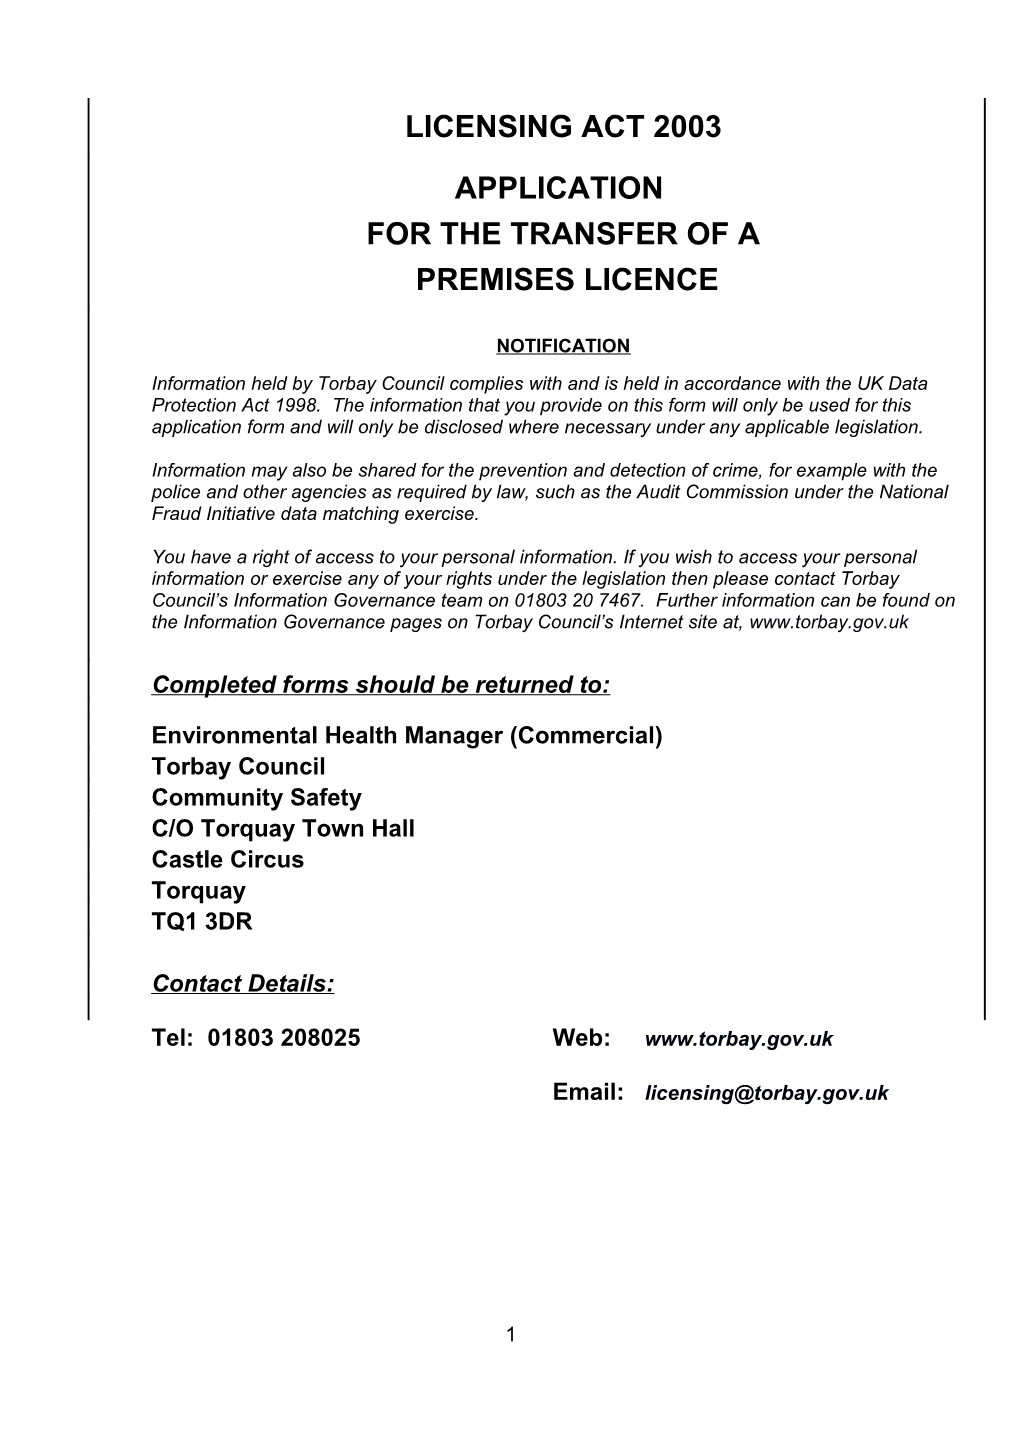 Application to Transfer Premises Licence to Be Granted Under the Licensing Act 2003 (Updated